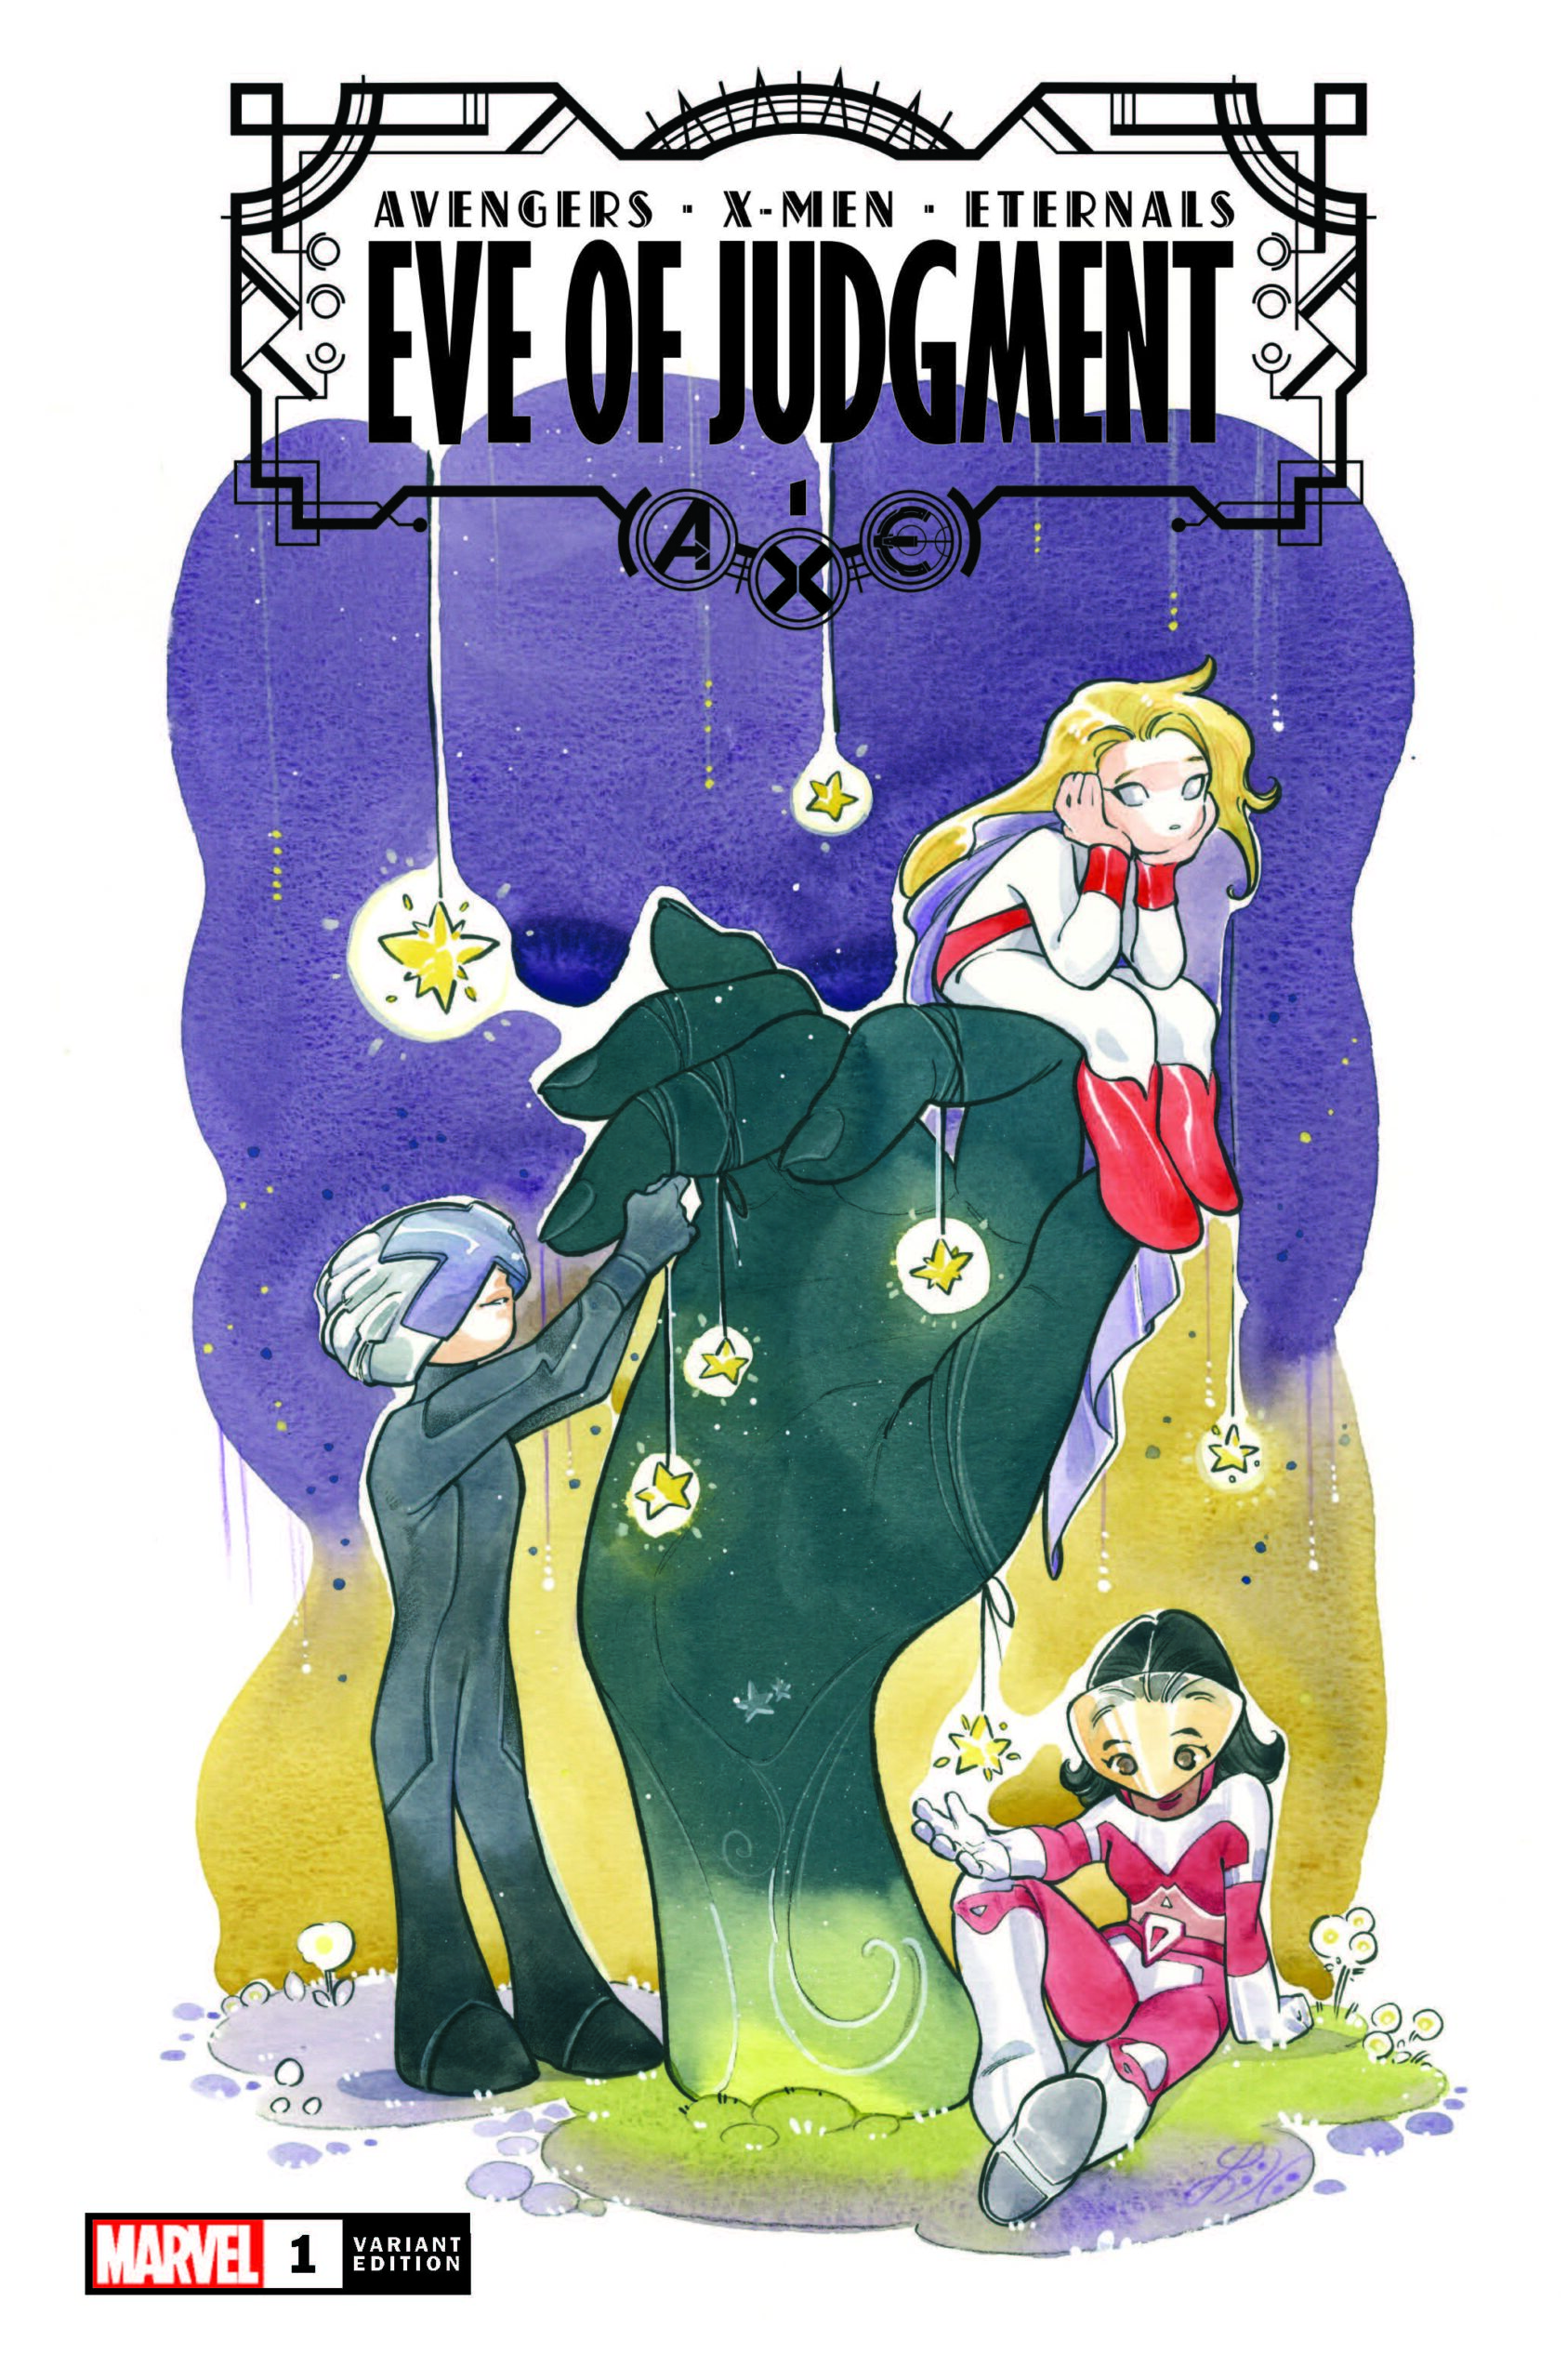 A.X.E. EVE OF JUDGMENT #1 VARIANT BY PEACH MOMOKO for SDCC 2022